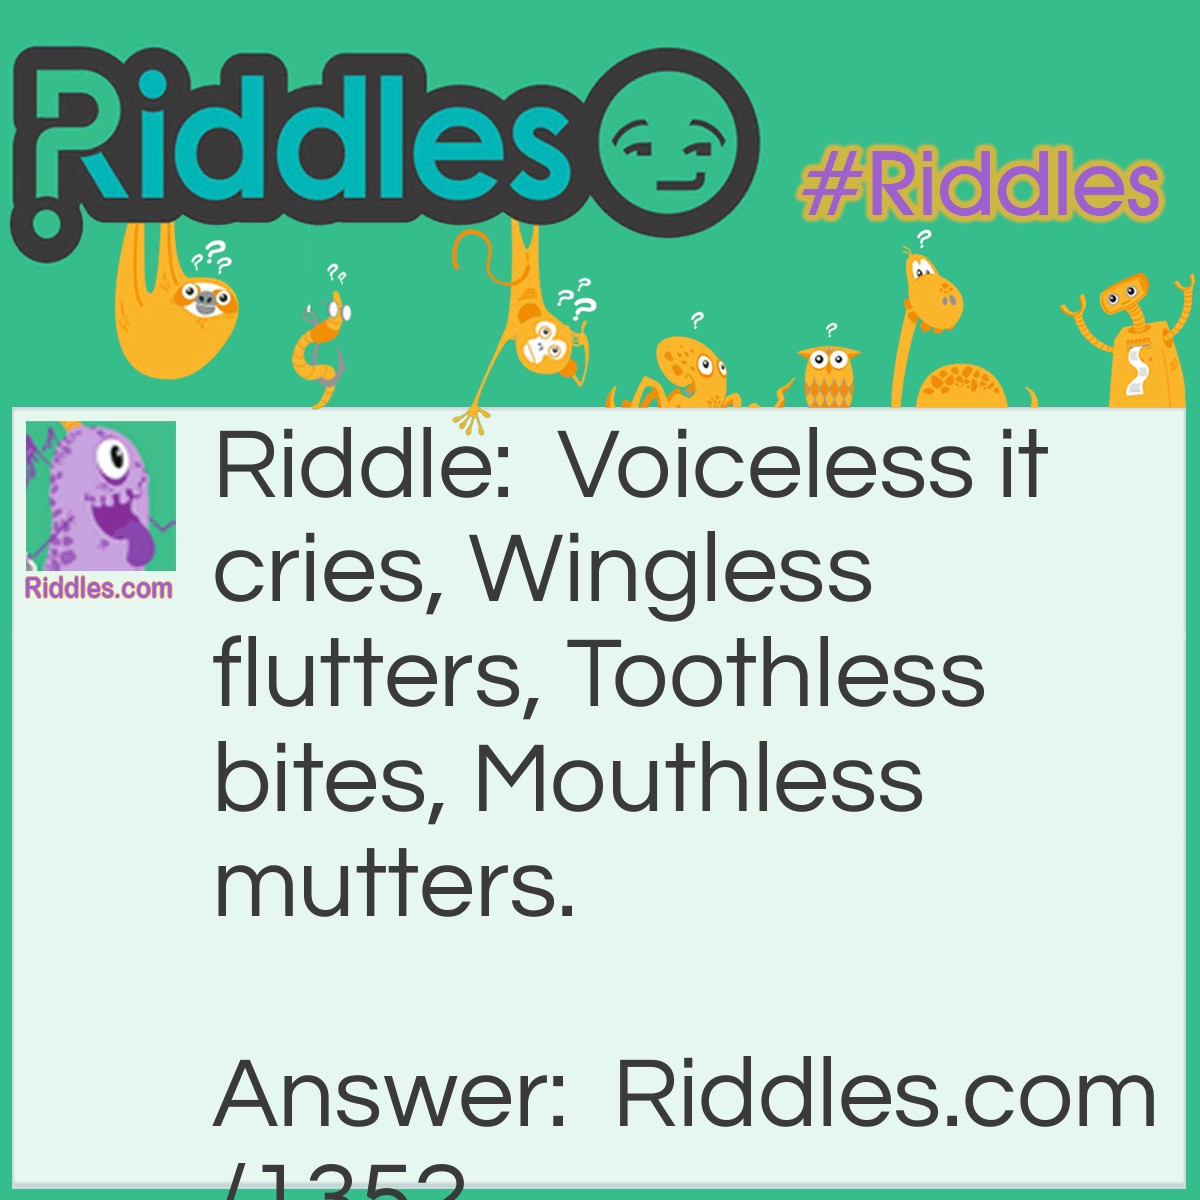 Riddle: Voiceless it cries, Wingless flutters, Toothless bites, Mouthless mutters. What is it? Answer: The Wind